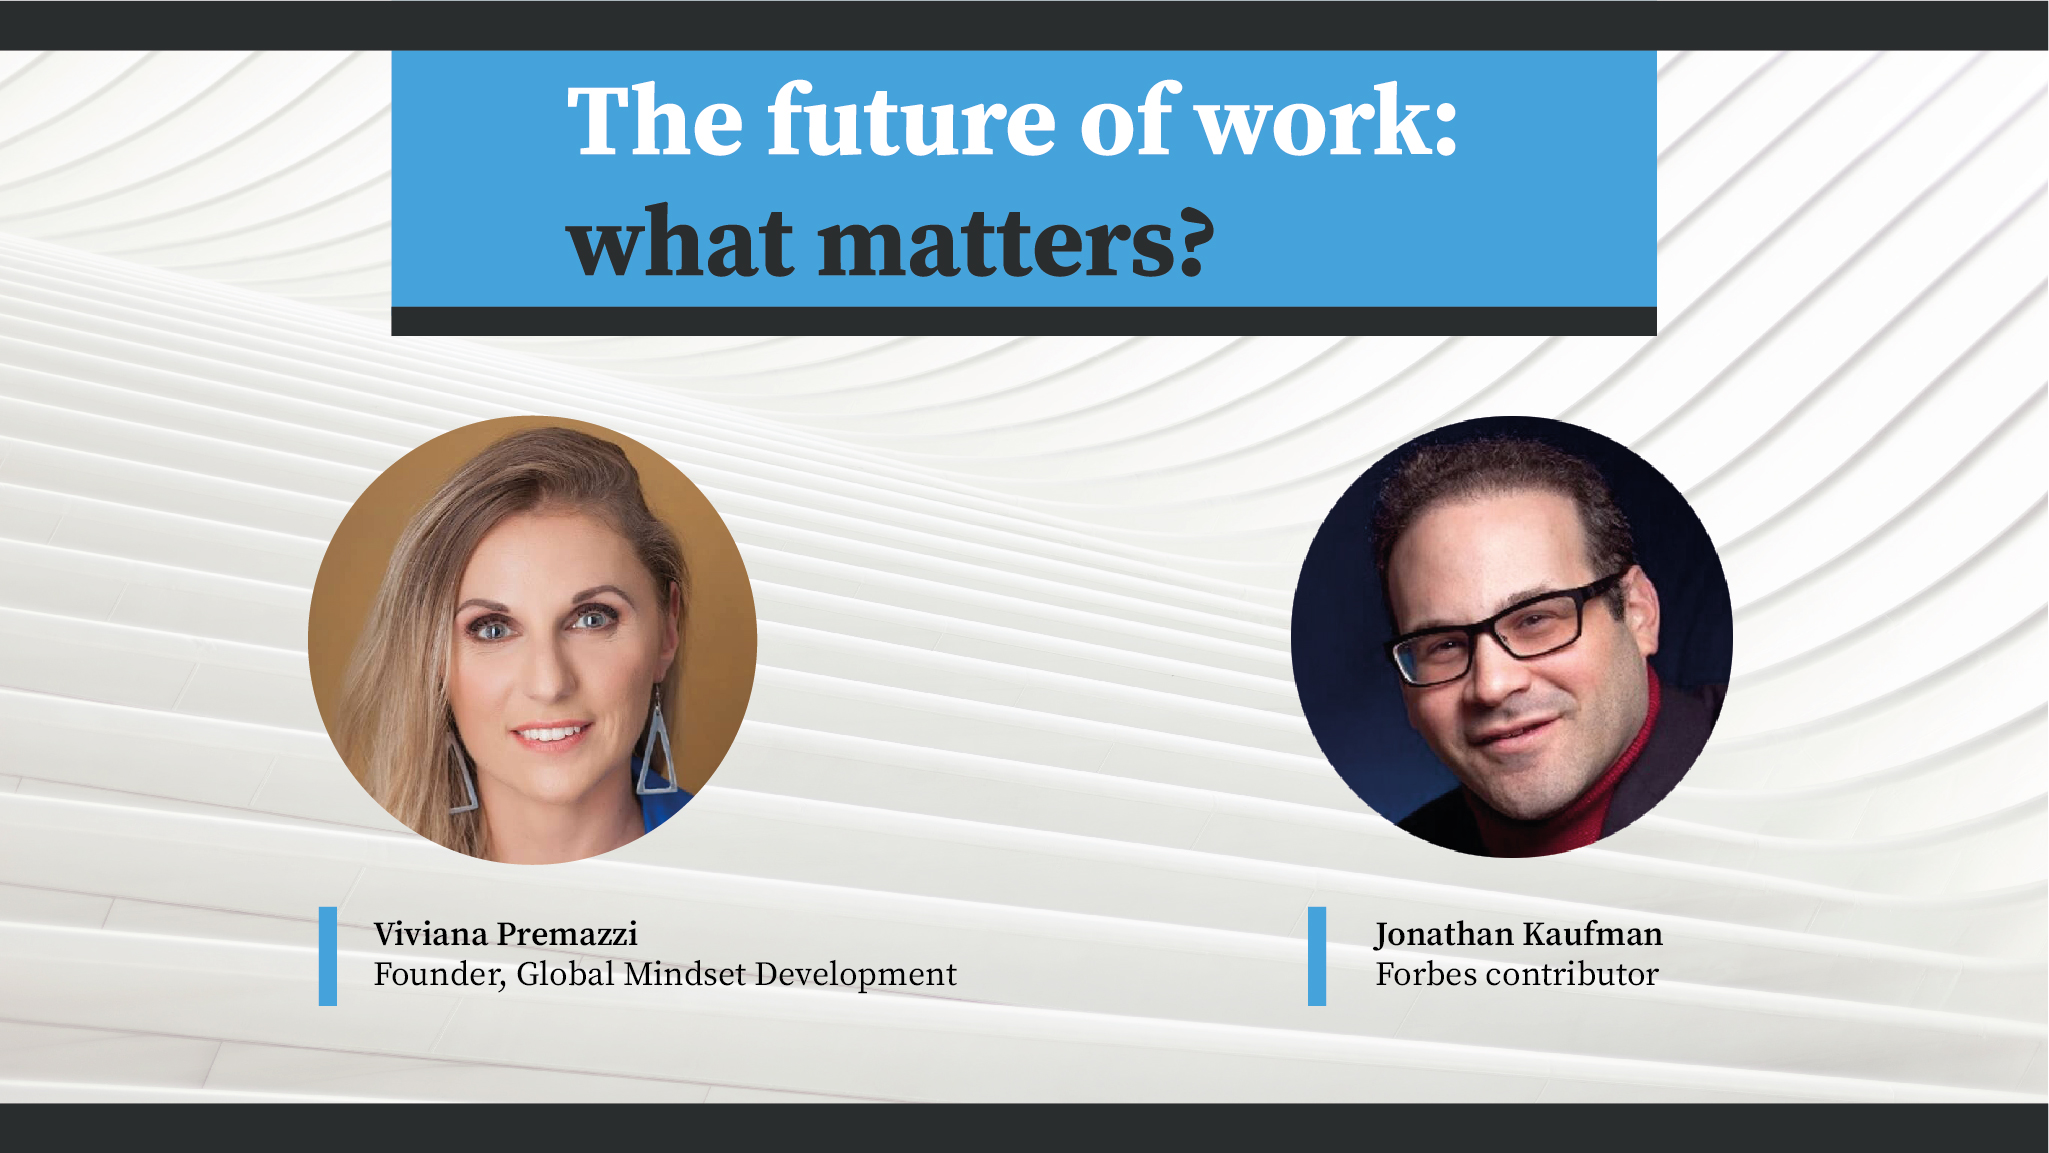 Interview - The future of work: what matters? with Viviana Premazzi and Jonathan Kaufman